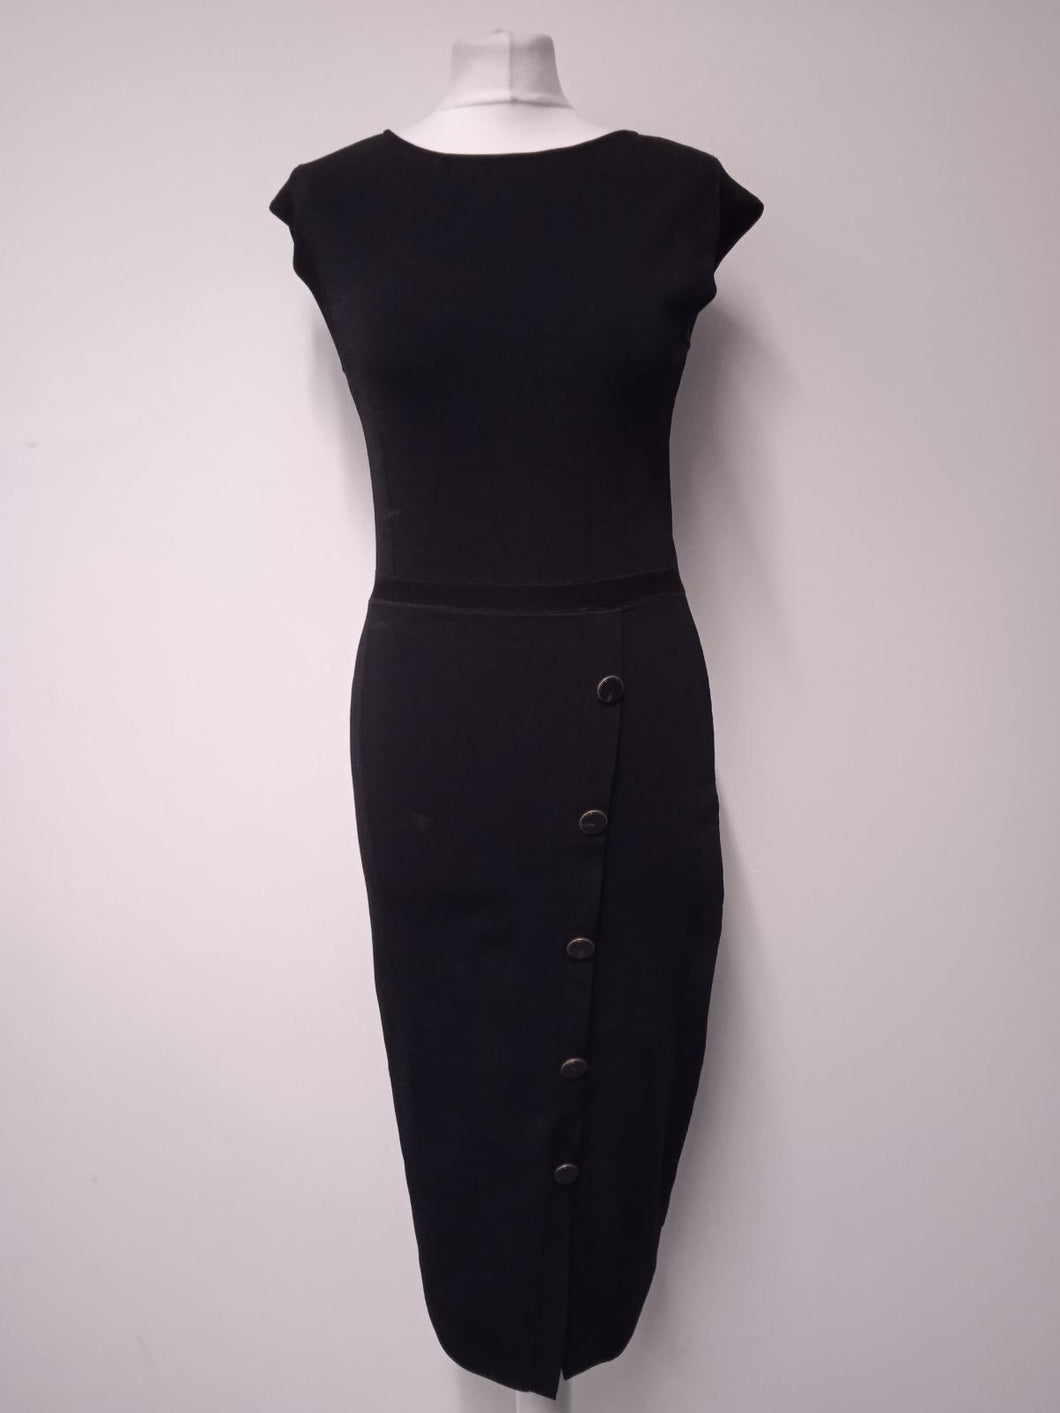 REISS Ladies Black Stretch-Fit Knee Length Sasha Knitted Bodycon Dress Size M